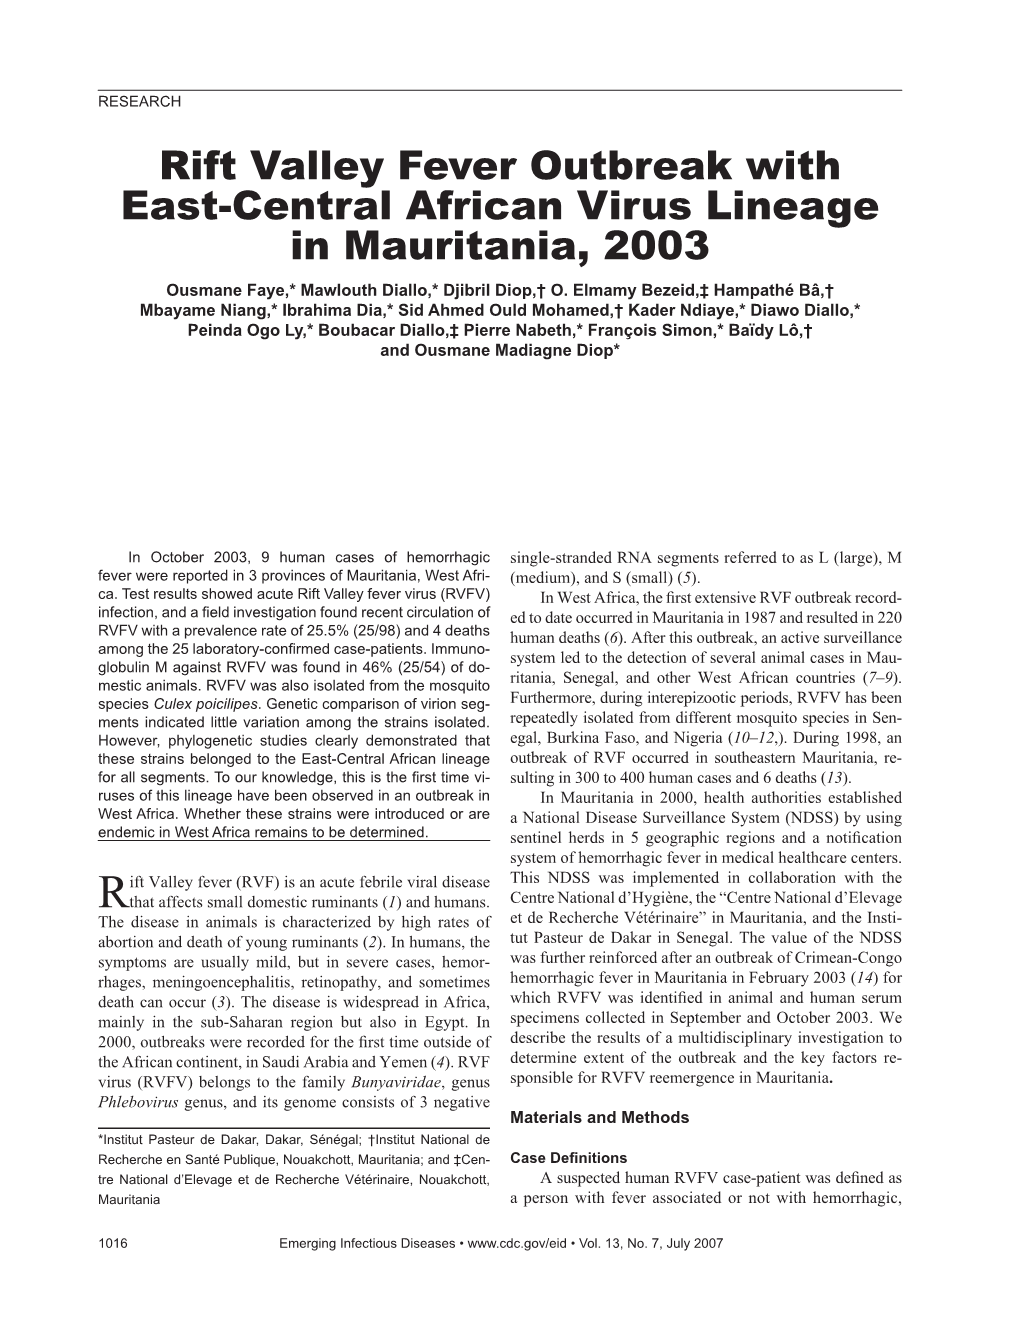 Rift Valley Fever Outbreak with East-Central African Virus Lineage in Mauritania, 2003 Ousmane Faye,* Mawlouth Diallo,* Djibril Diop,† O